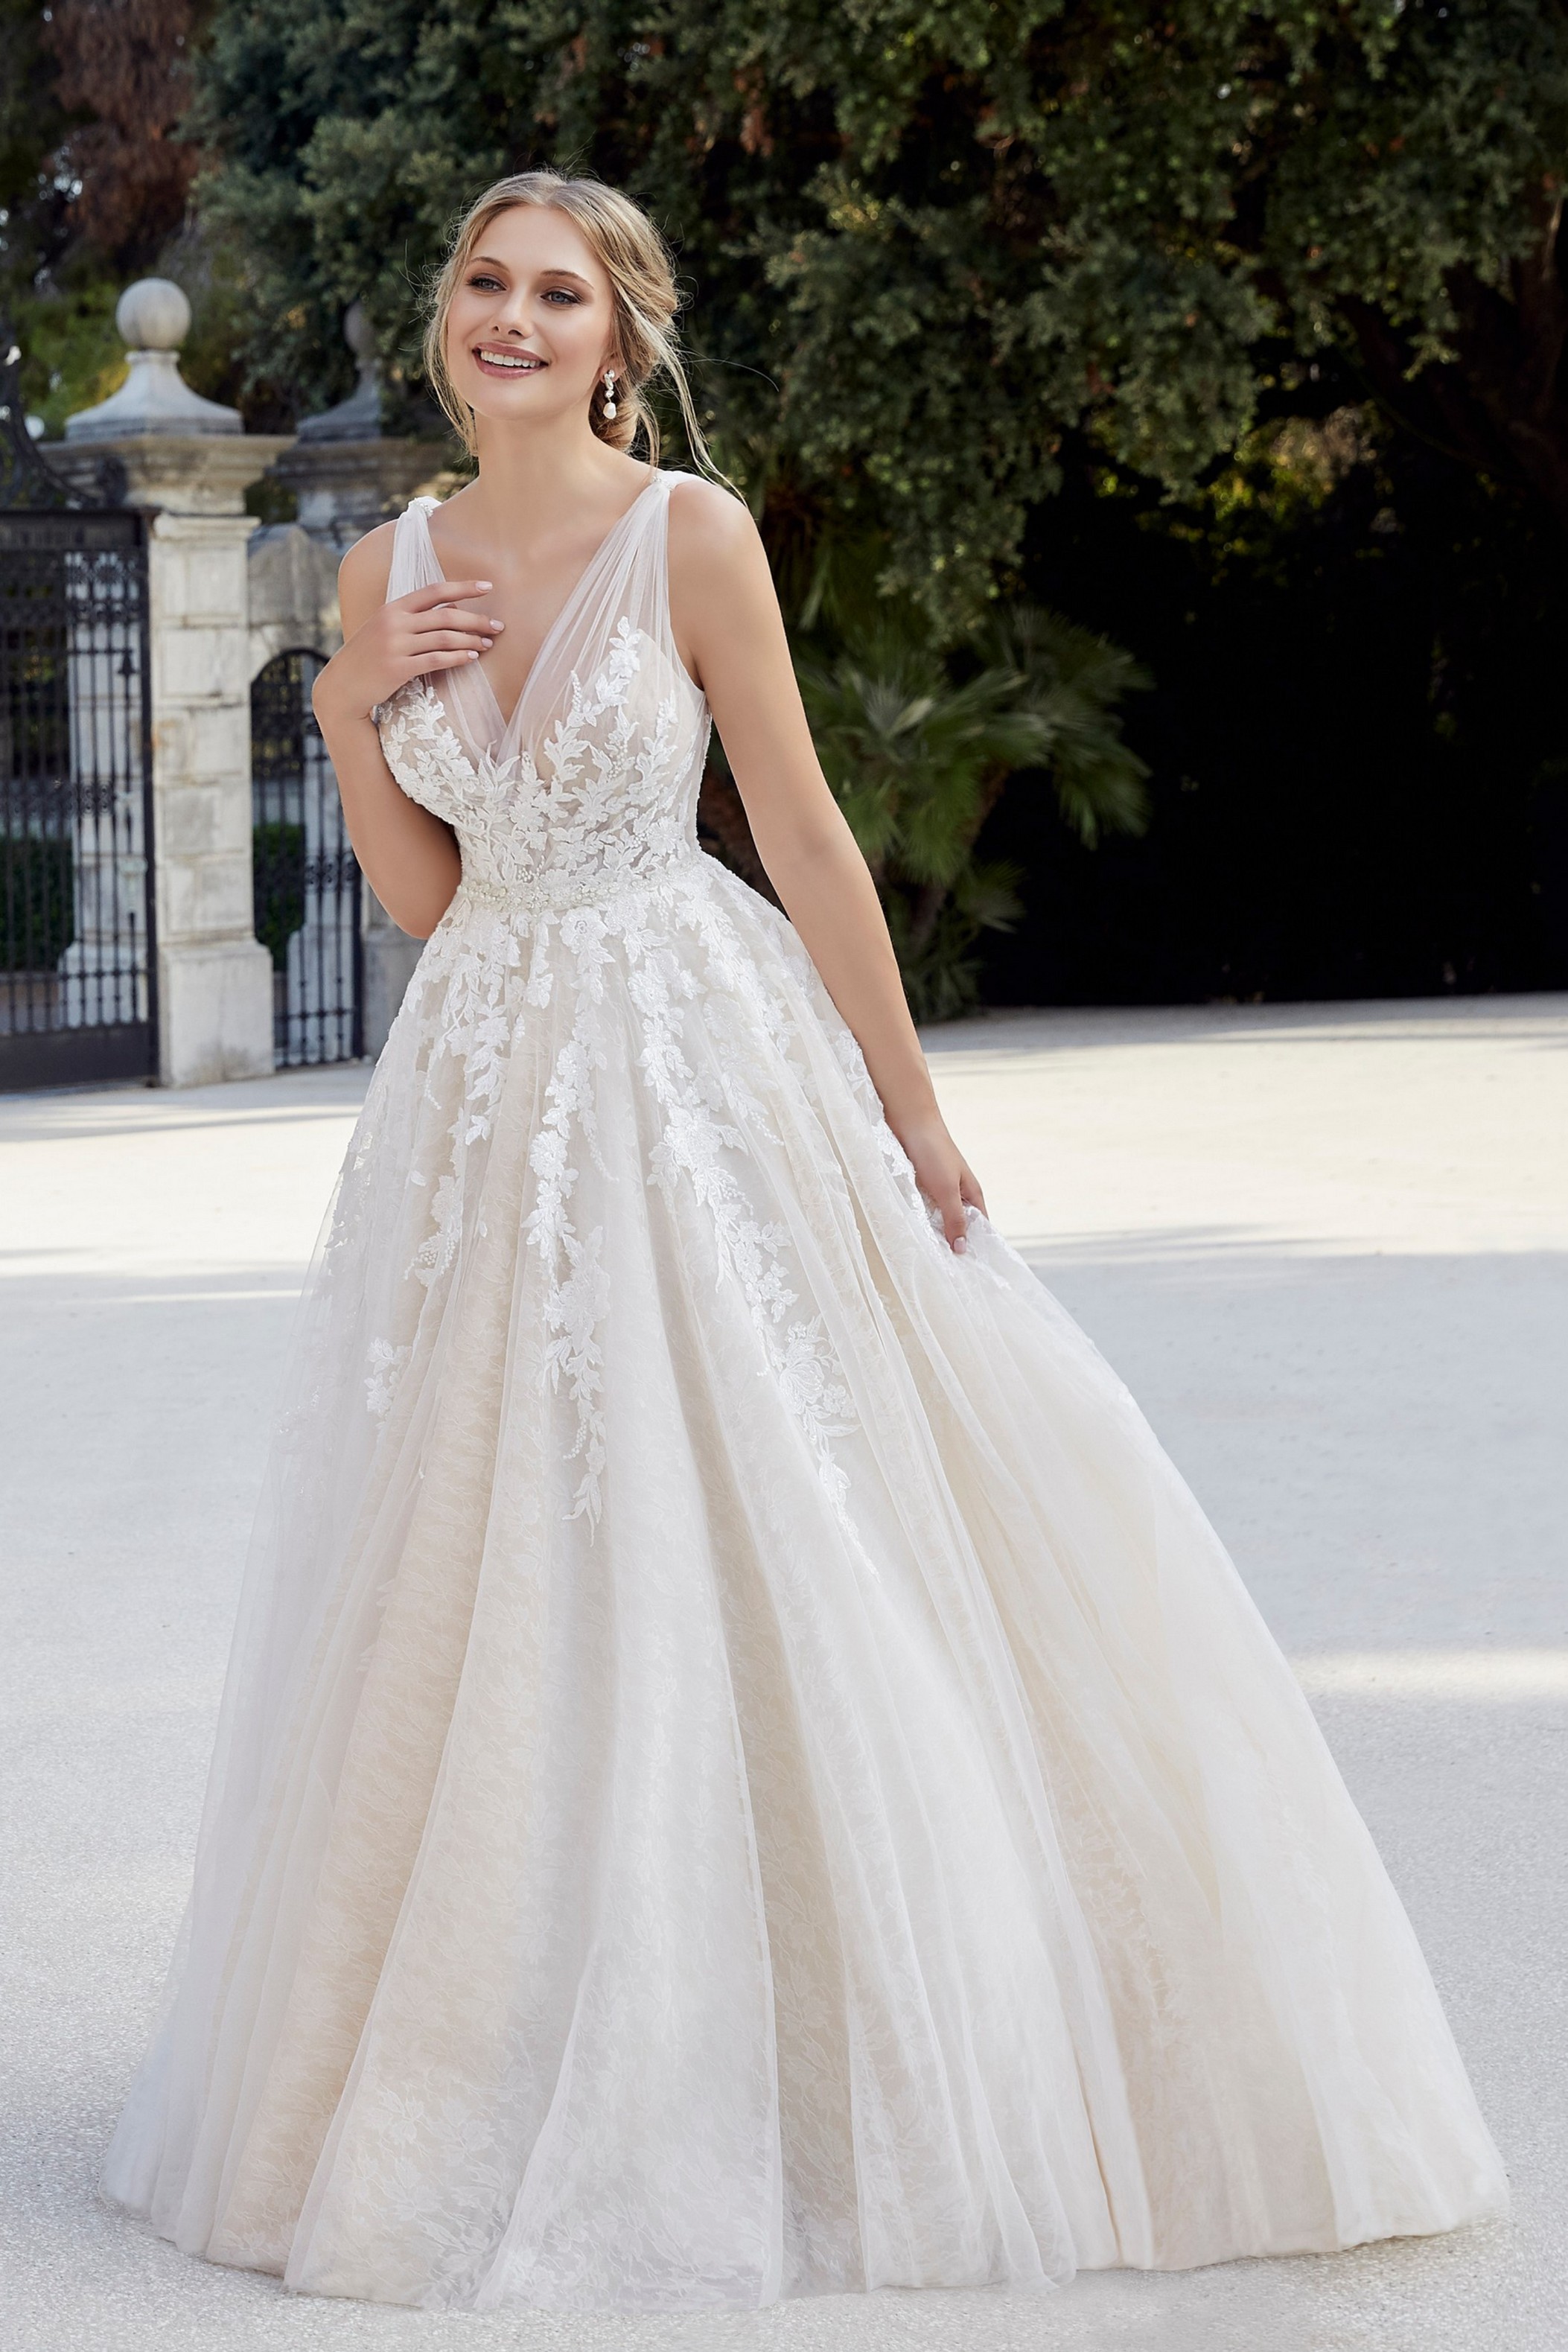 Model stood by grand black iron gates in Ronald Joyce style 18507, a vintage inspired tulle ballgown wedding dress with lace embroidery detail and ruched tulle straps